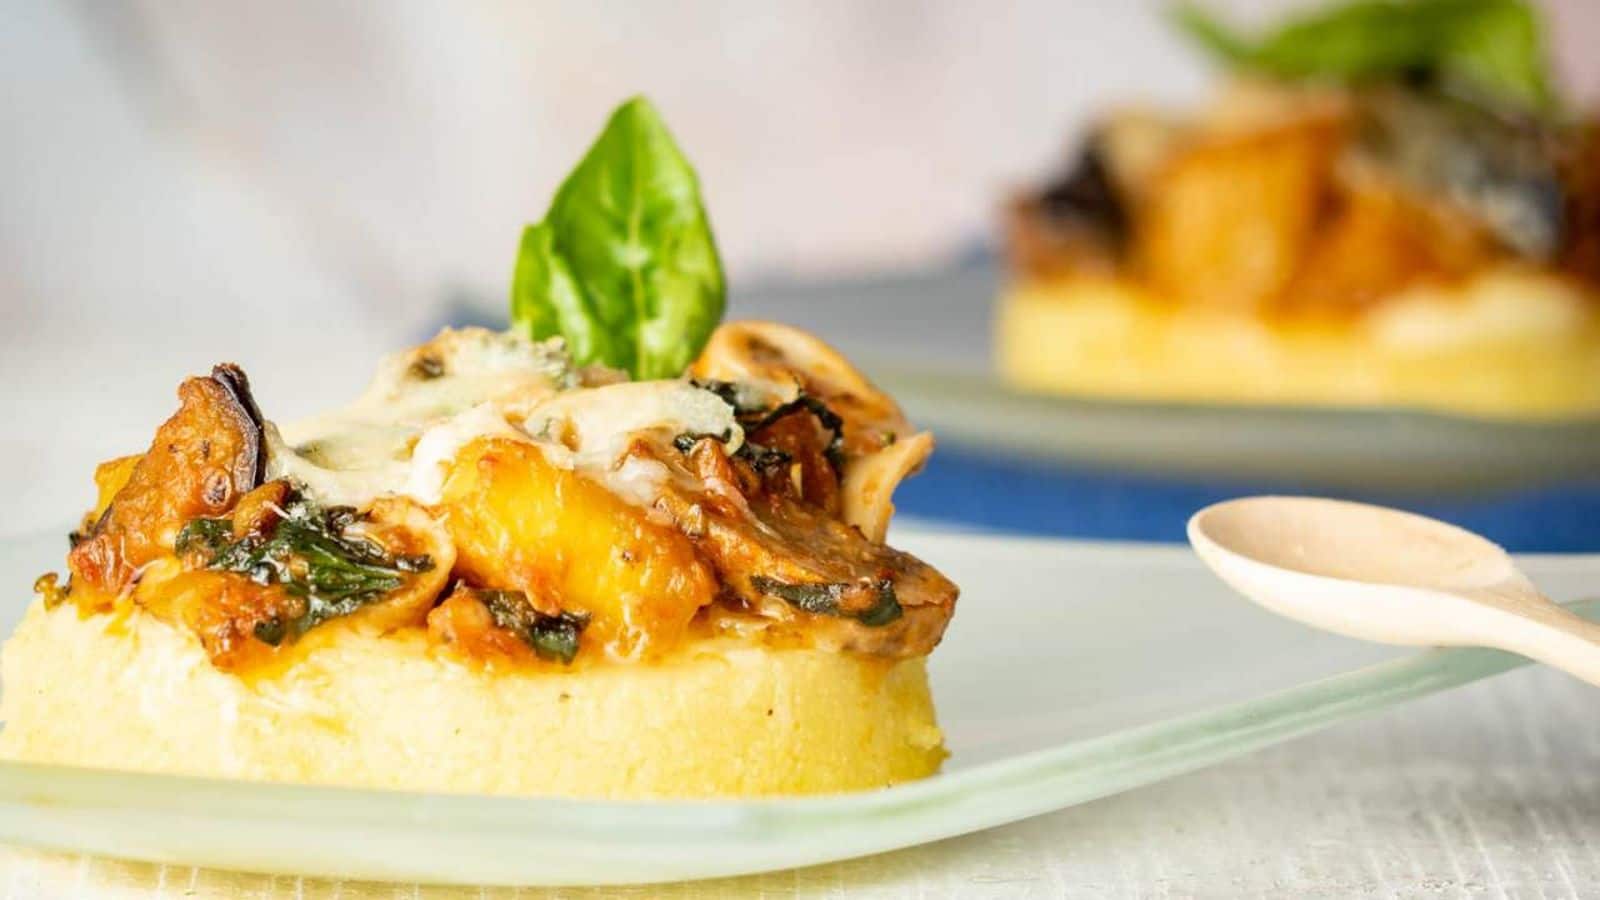 Check out this Italian polenta recipe for a flavorsome day